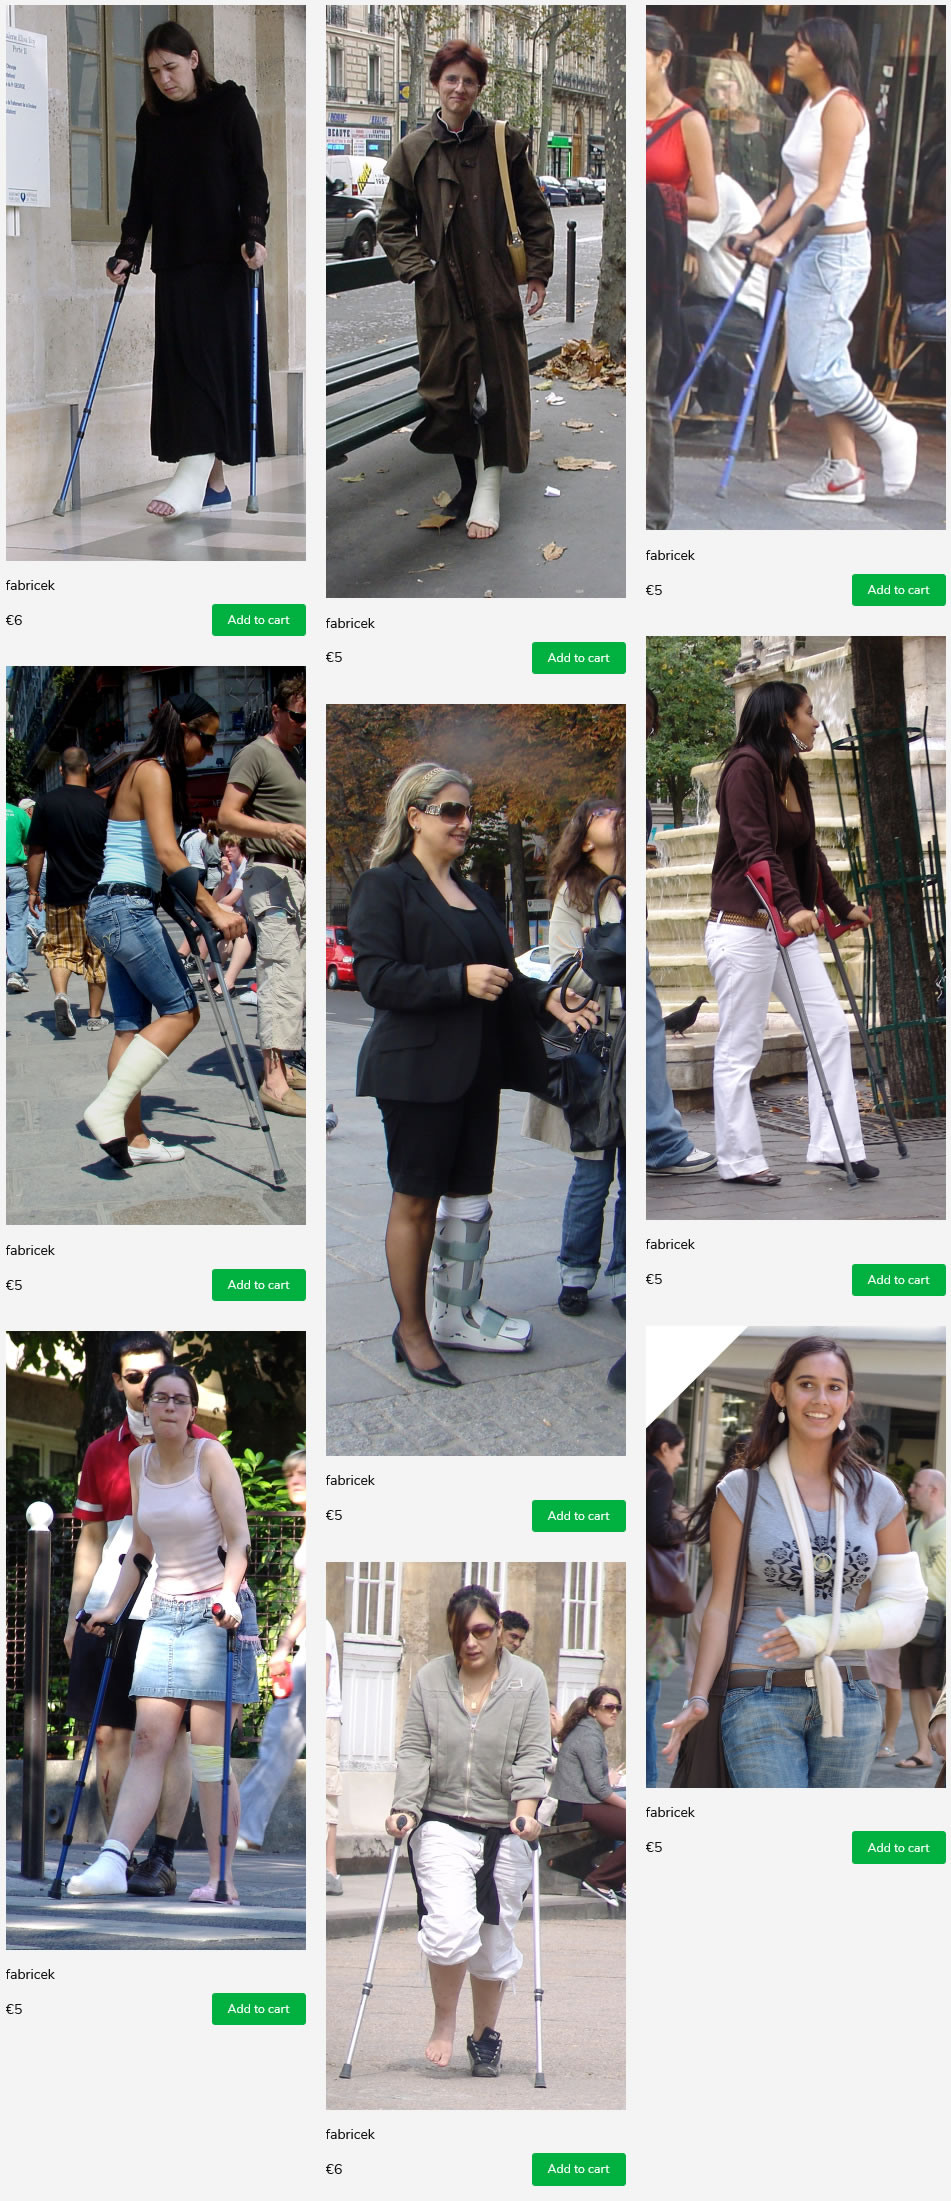 9 sets of french women with injured feet on crutches. Wearing casts, braces and socks.